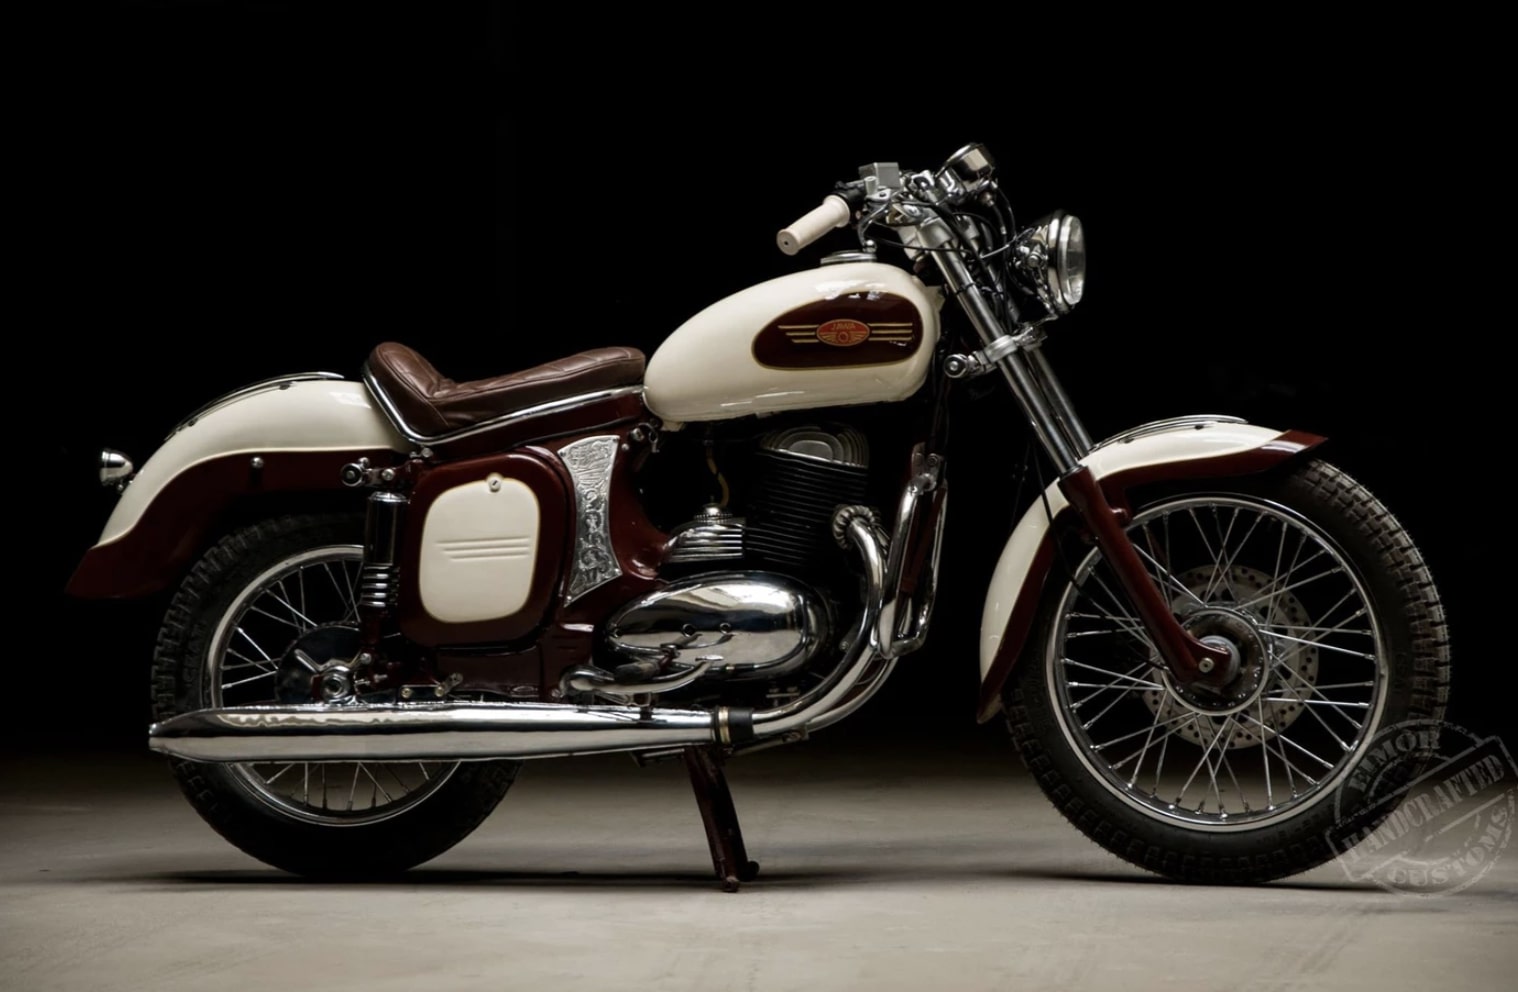 250cc Jawa Classic Motorcycle Quick Details and Live Photos - pic